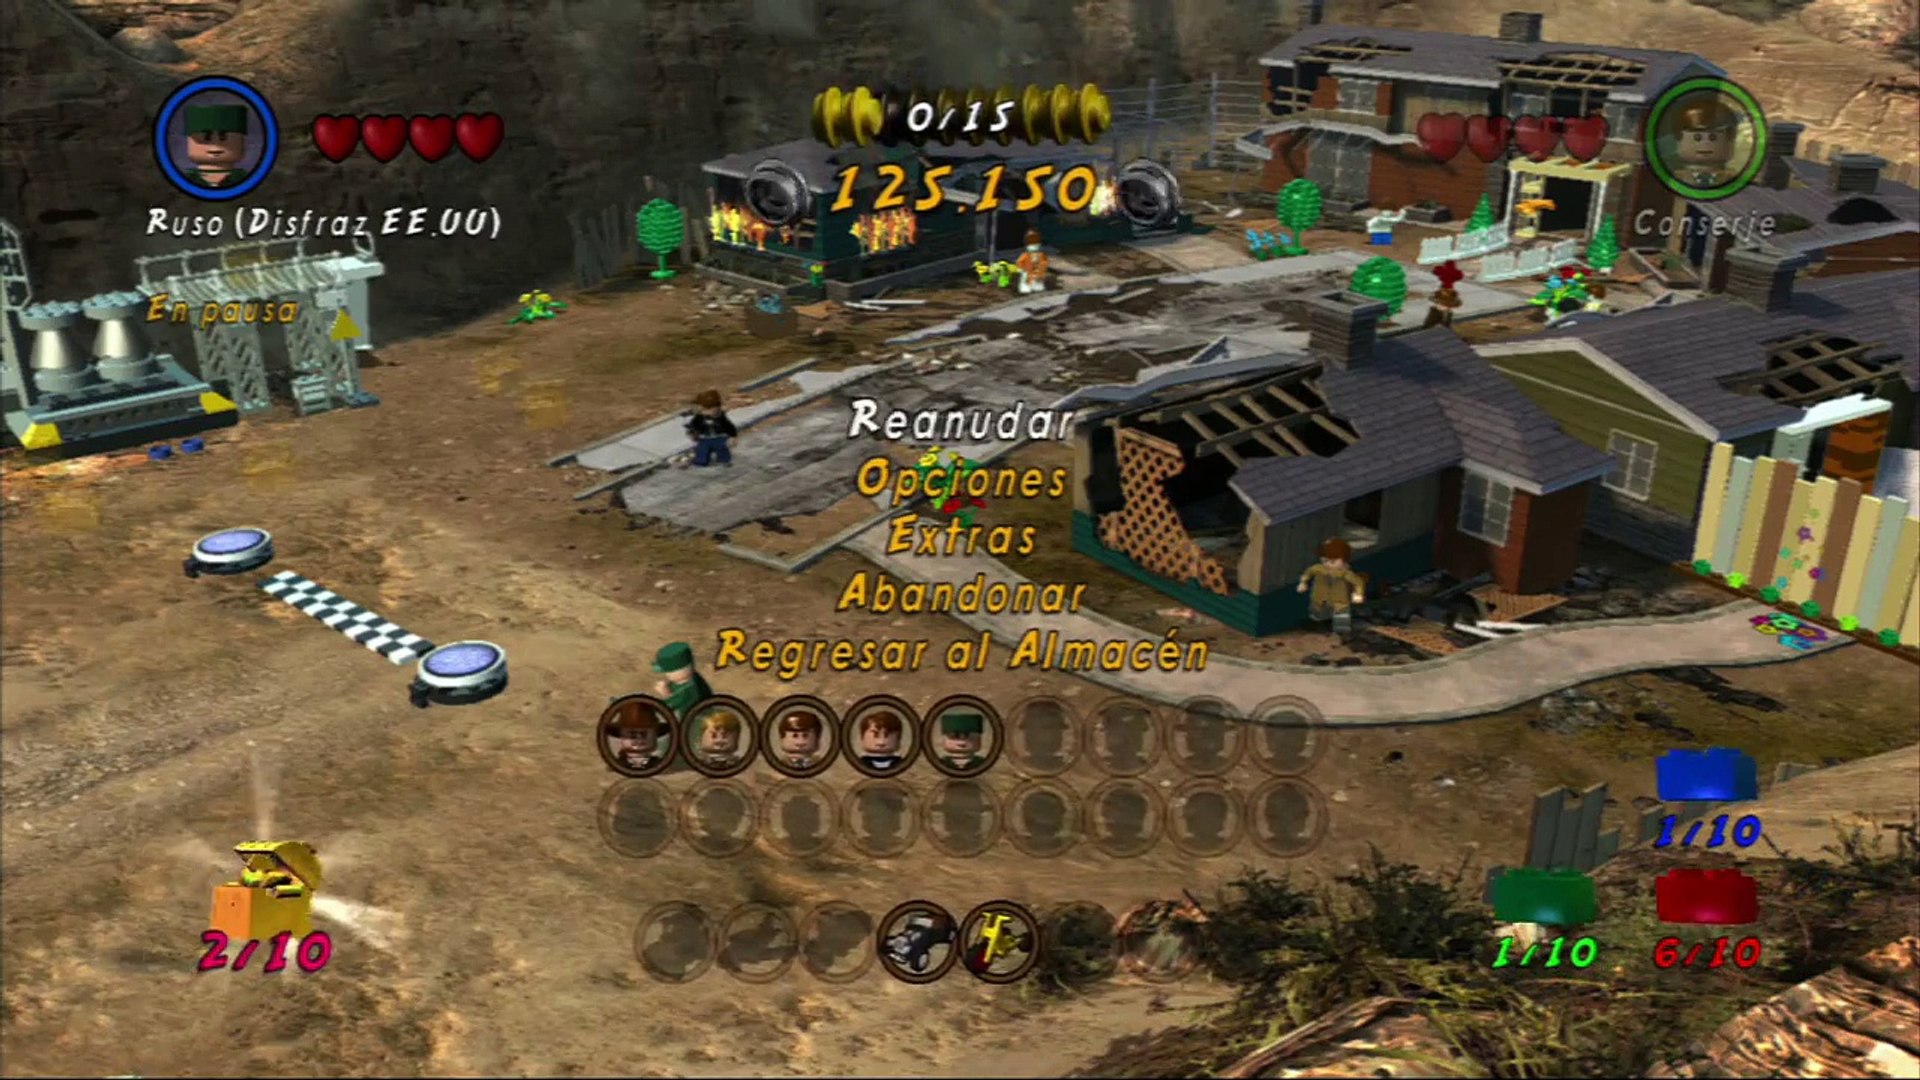 Lego Indiana Jones 2: The Adventure Continues. PS3. Gameplay 4. HD. video Dailymotion